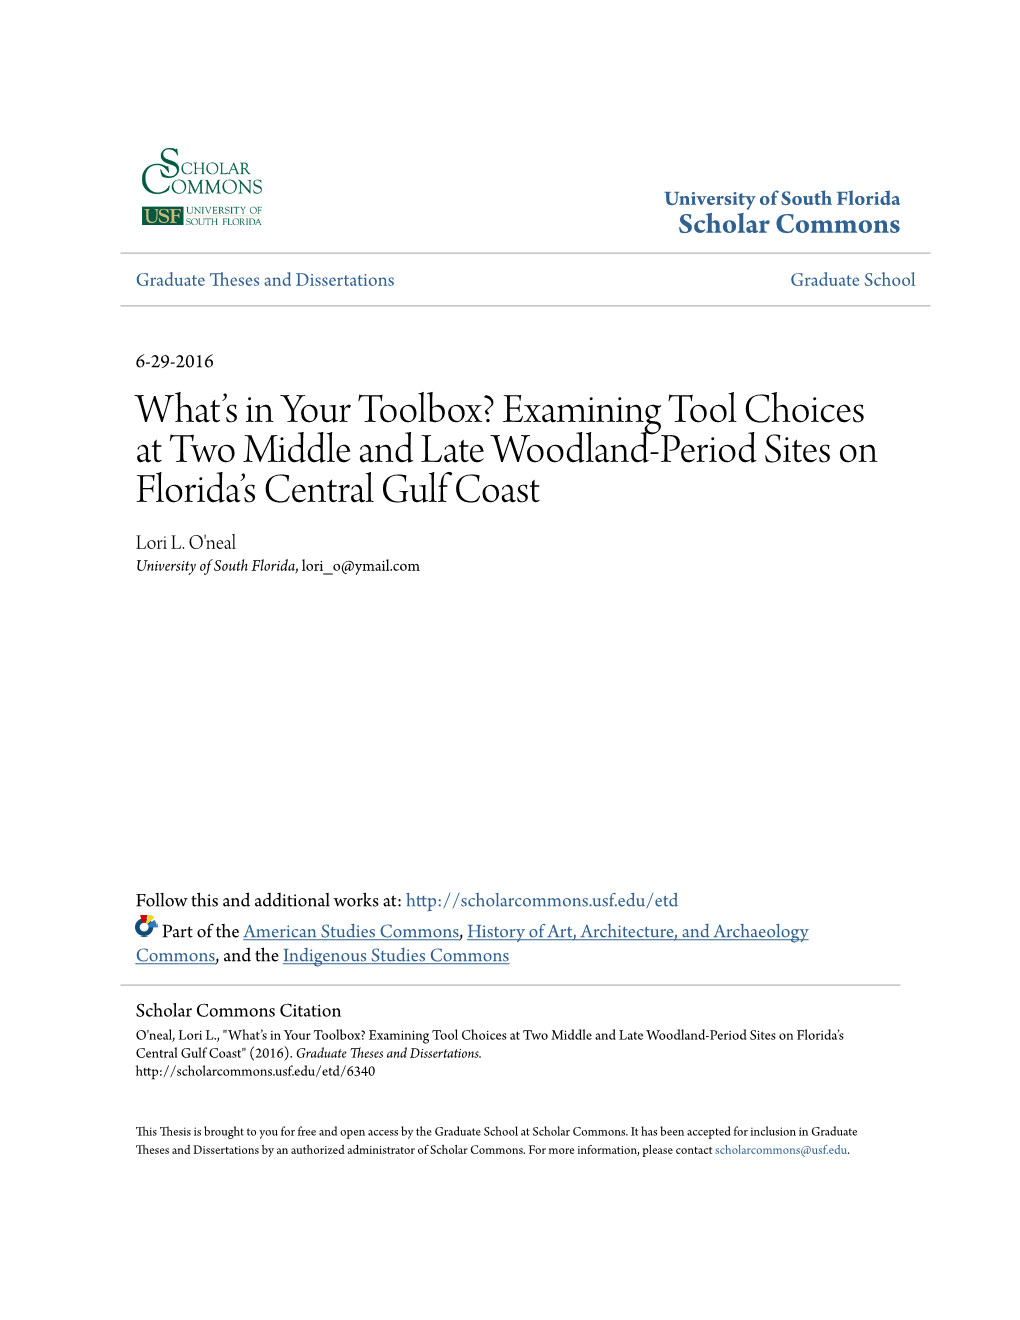 Examining Tool Choices at Two Middle and Late Woodland-Period Sites on Florida’S Central Gulf Coast Lori L